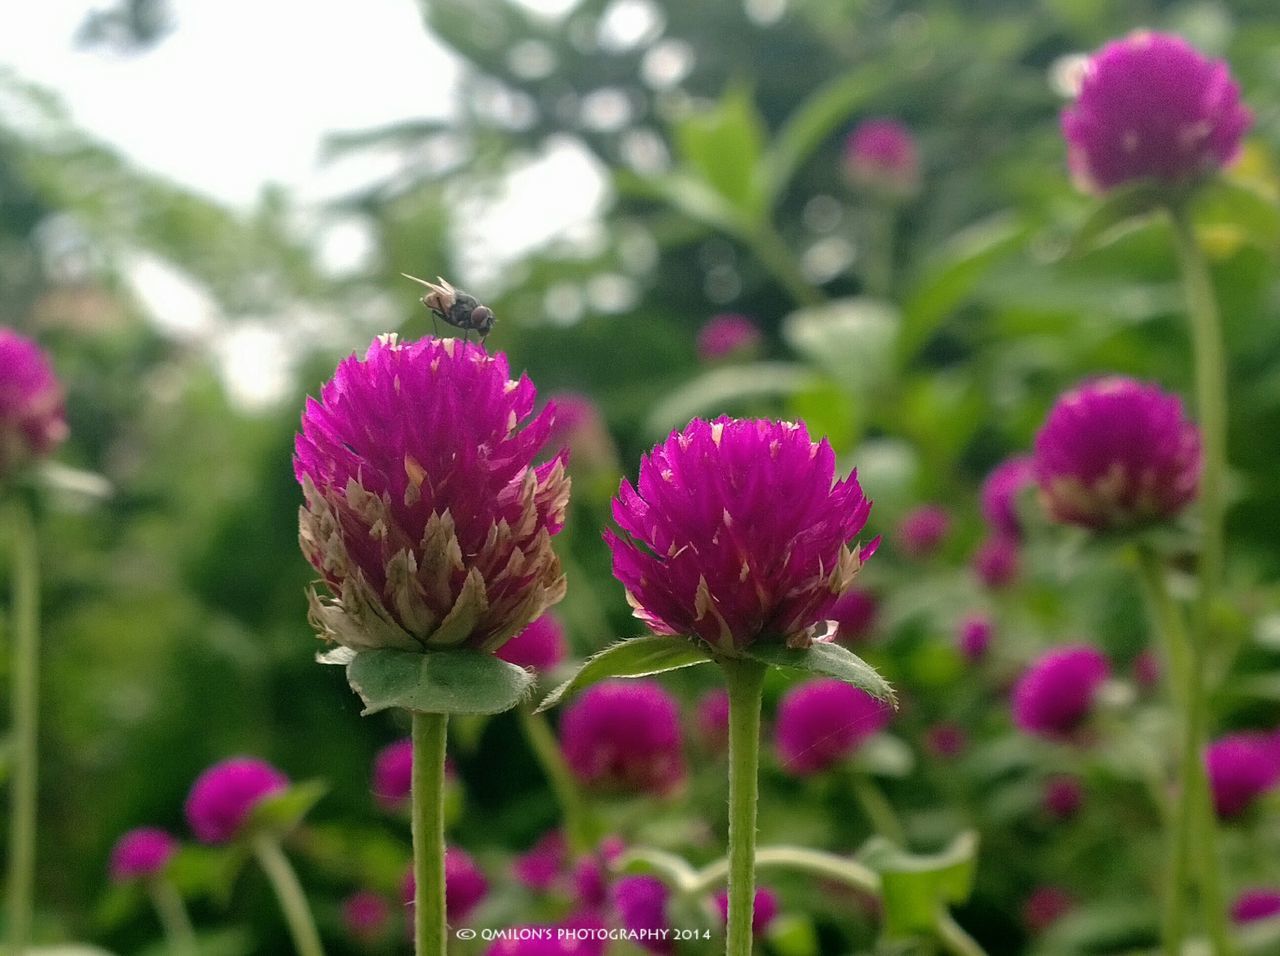 flower, freshness, growth, fragility, focus on foreground, pink color, beauty in nature, close-up, petal, plant, flower head, nature, stem, blooming, purple, bud, selective focus, in bloom, outdoors, day